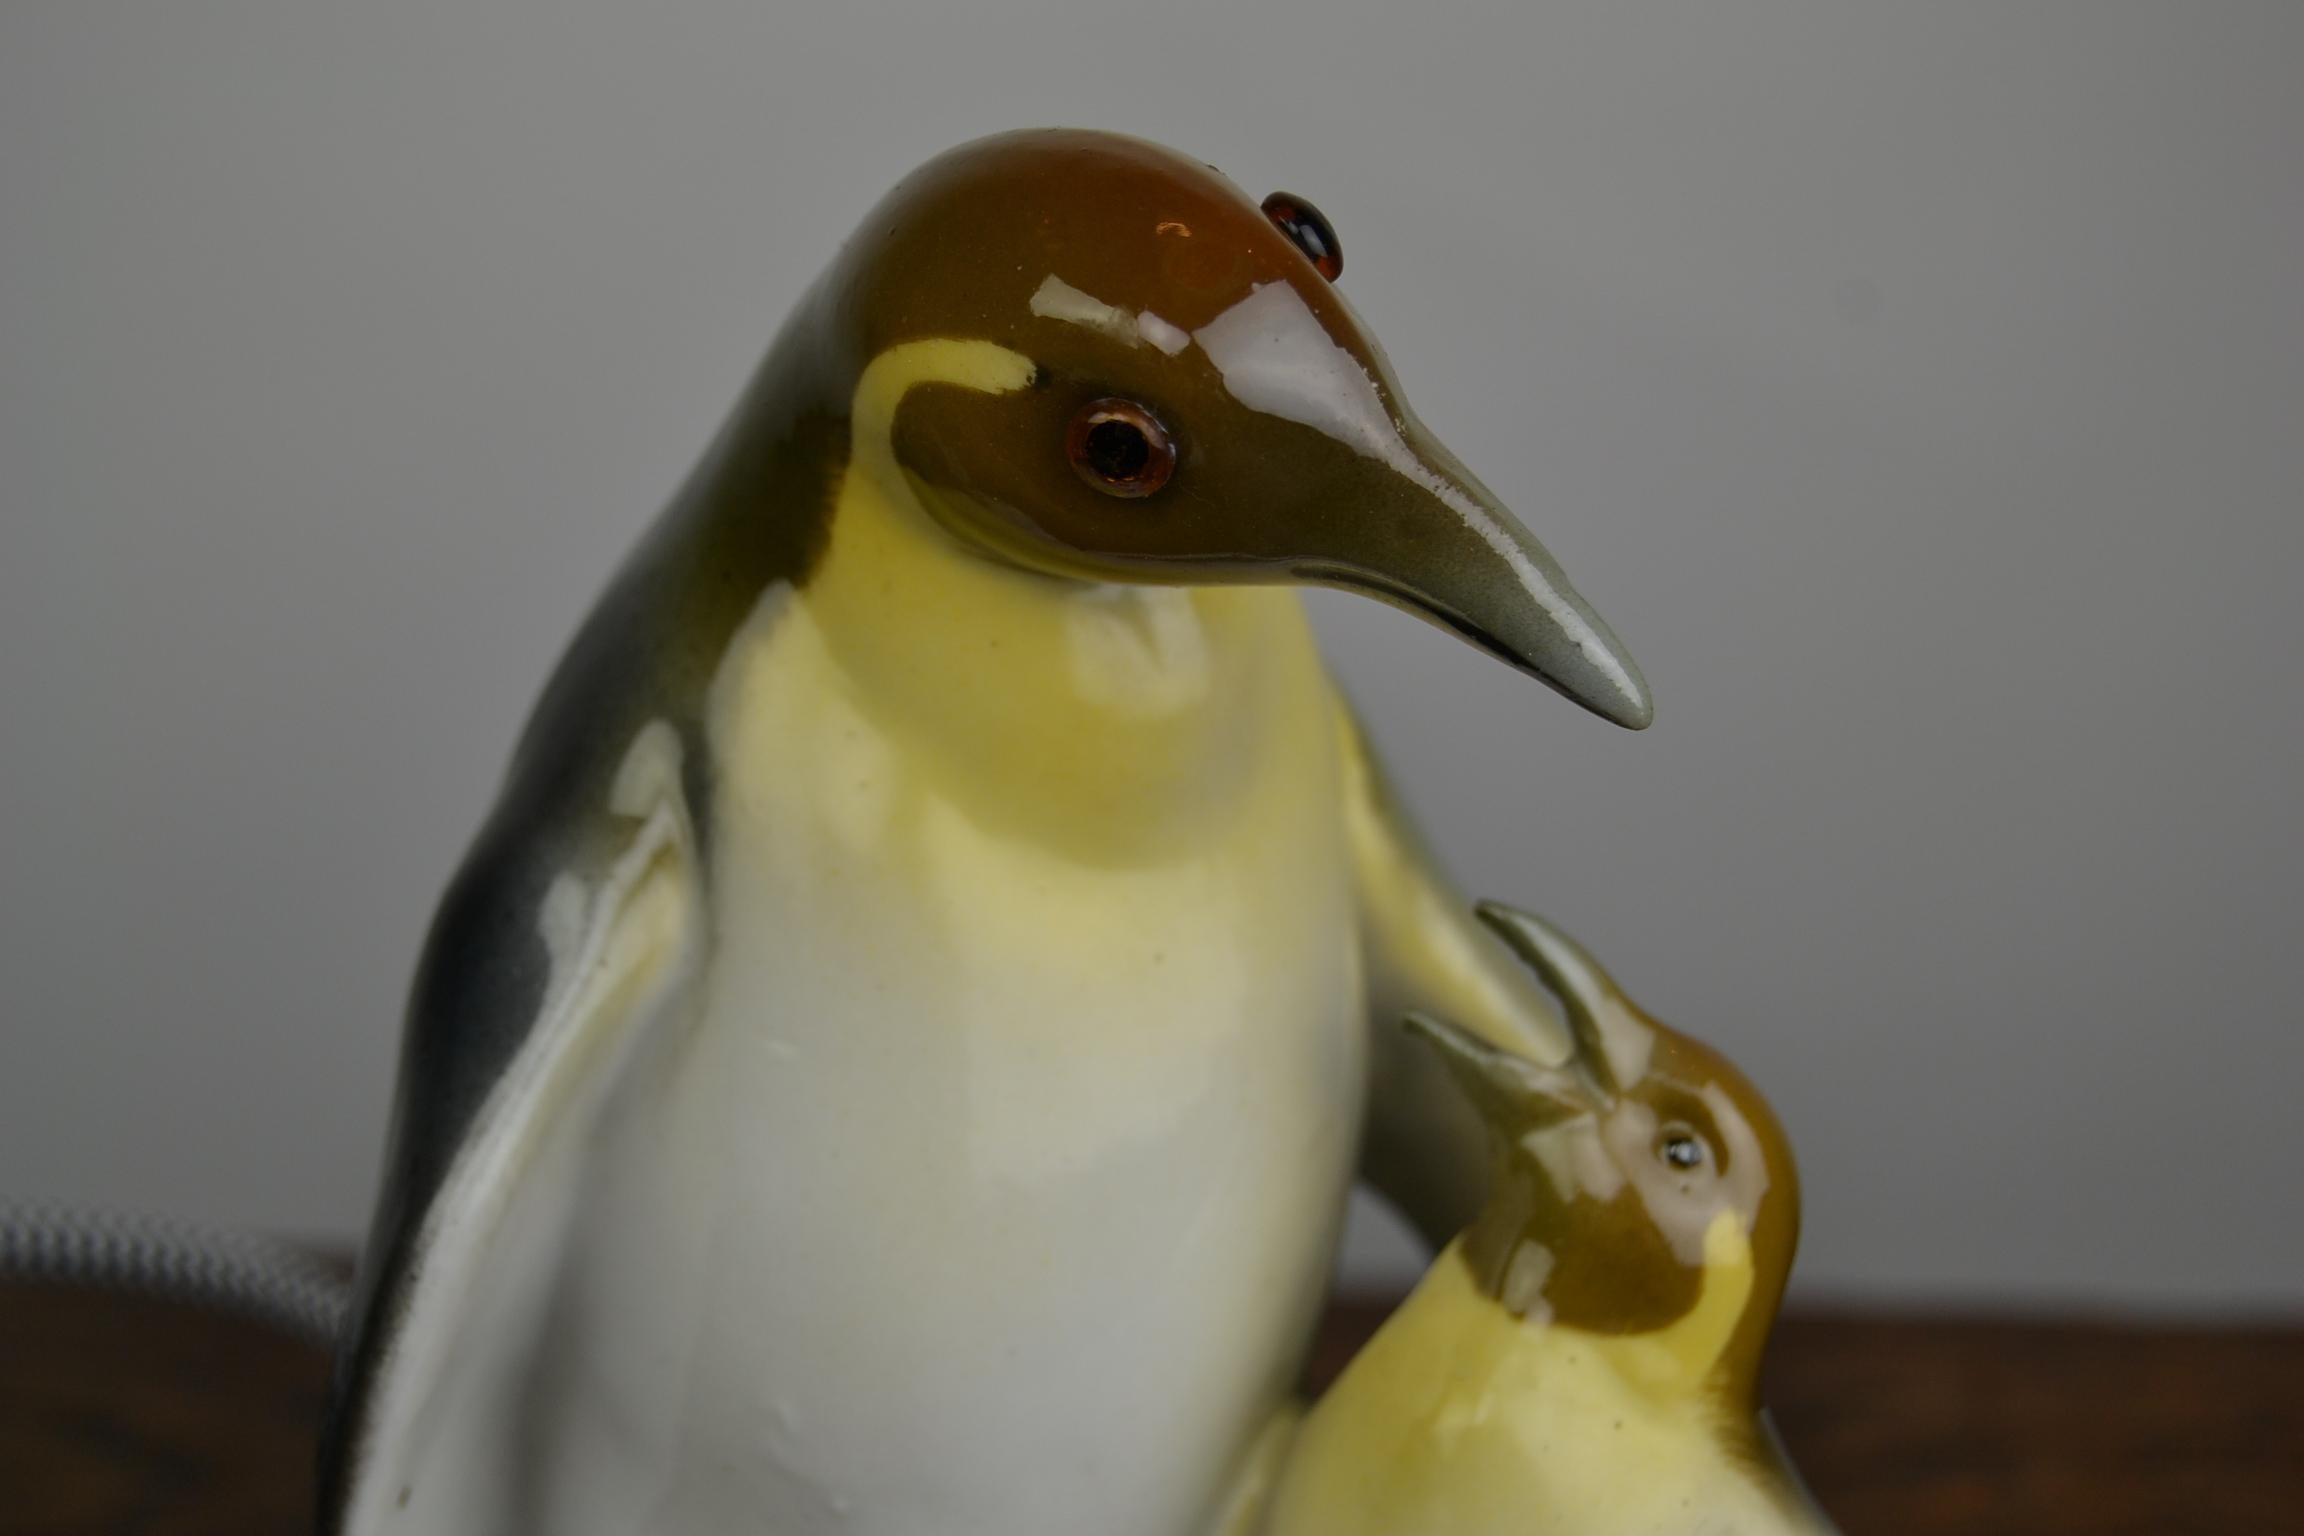 Art Deco Porcelain Perfume Lamp with 2 Penguin, a mama penguin and her young.
This porcelain animal sculpture - Animal table lamp dates was made by Ridem, Germany in the 1930s. This small table light is in working condition and has been rewired.